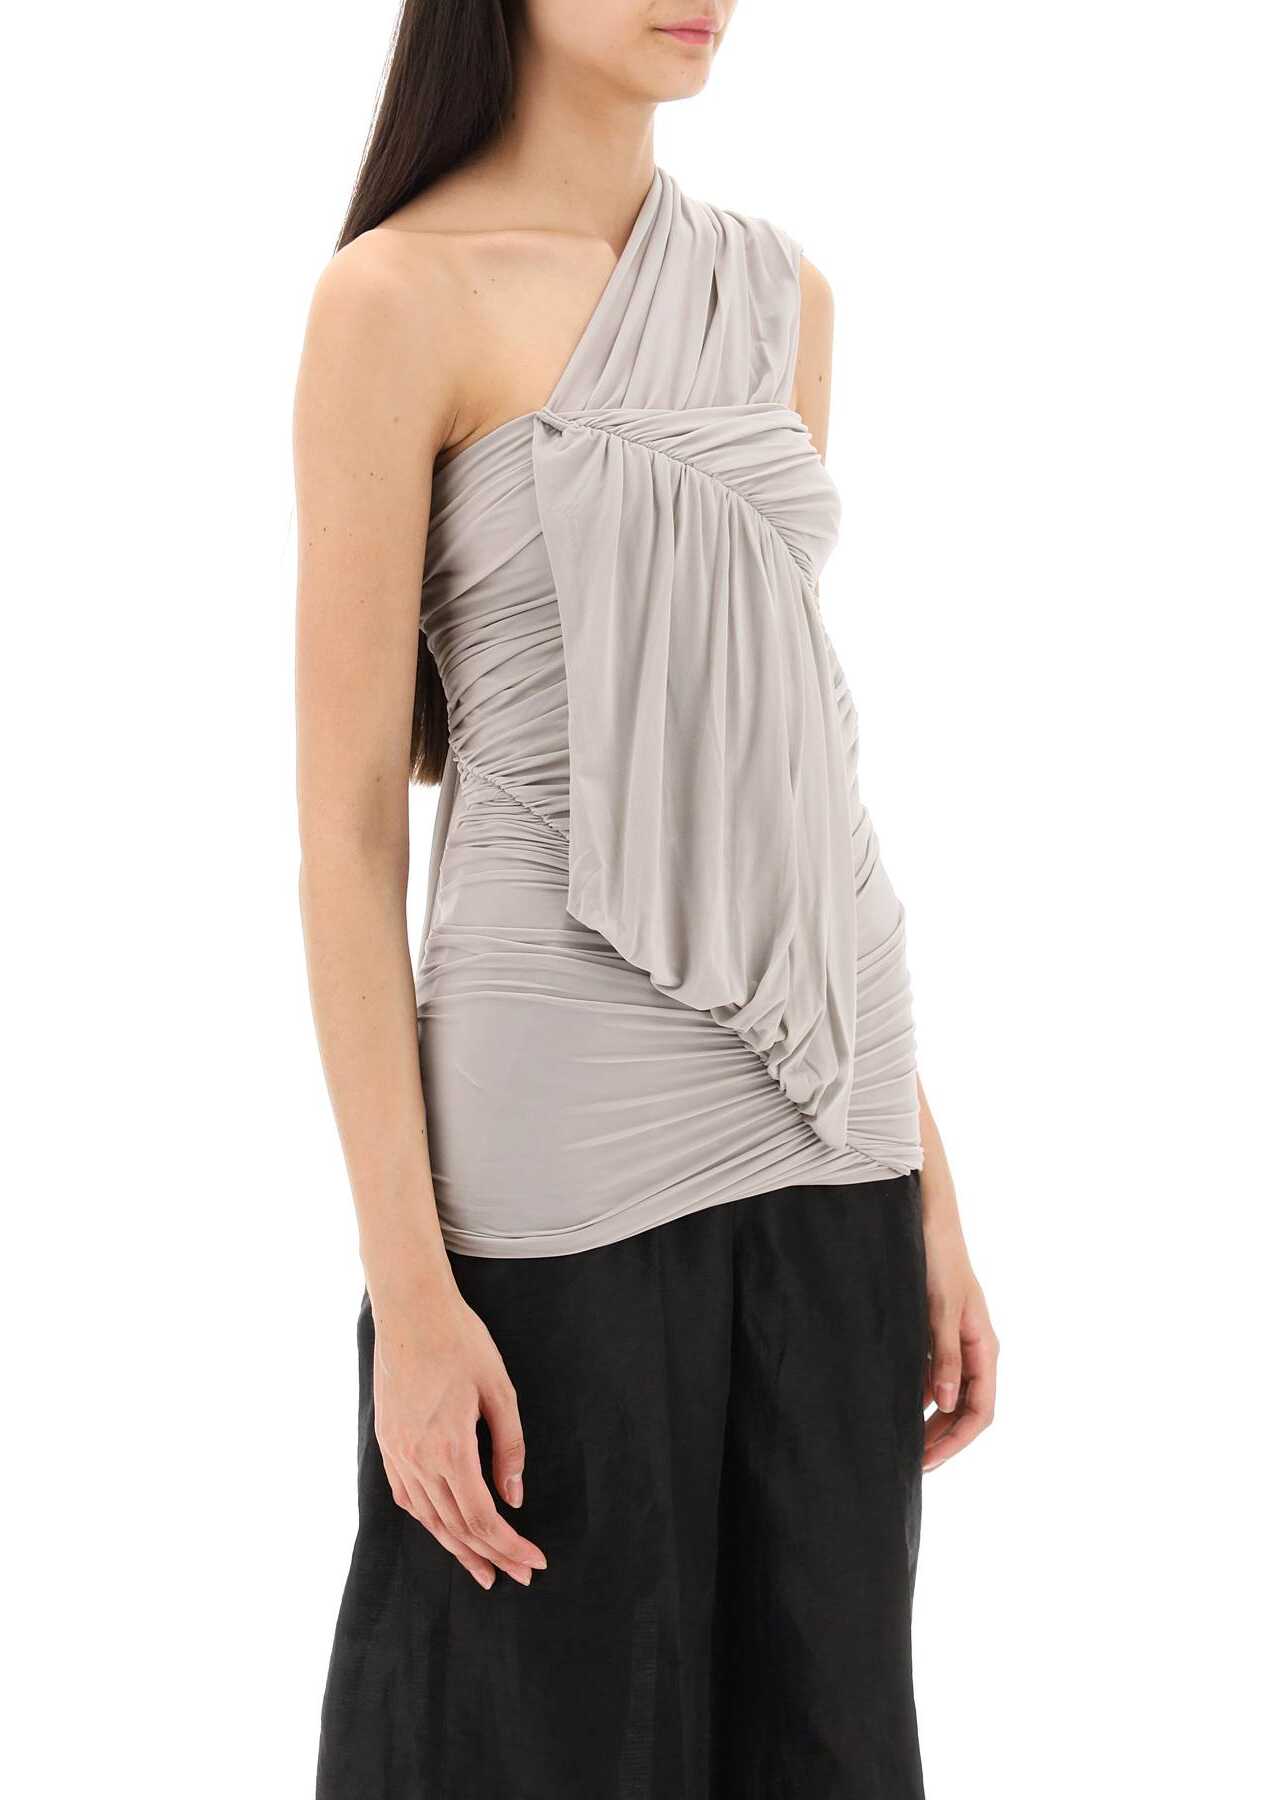 Poze Rick Owens One-Shoulder Ruched Top PERLA b-mall.ro 